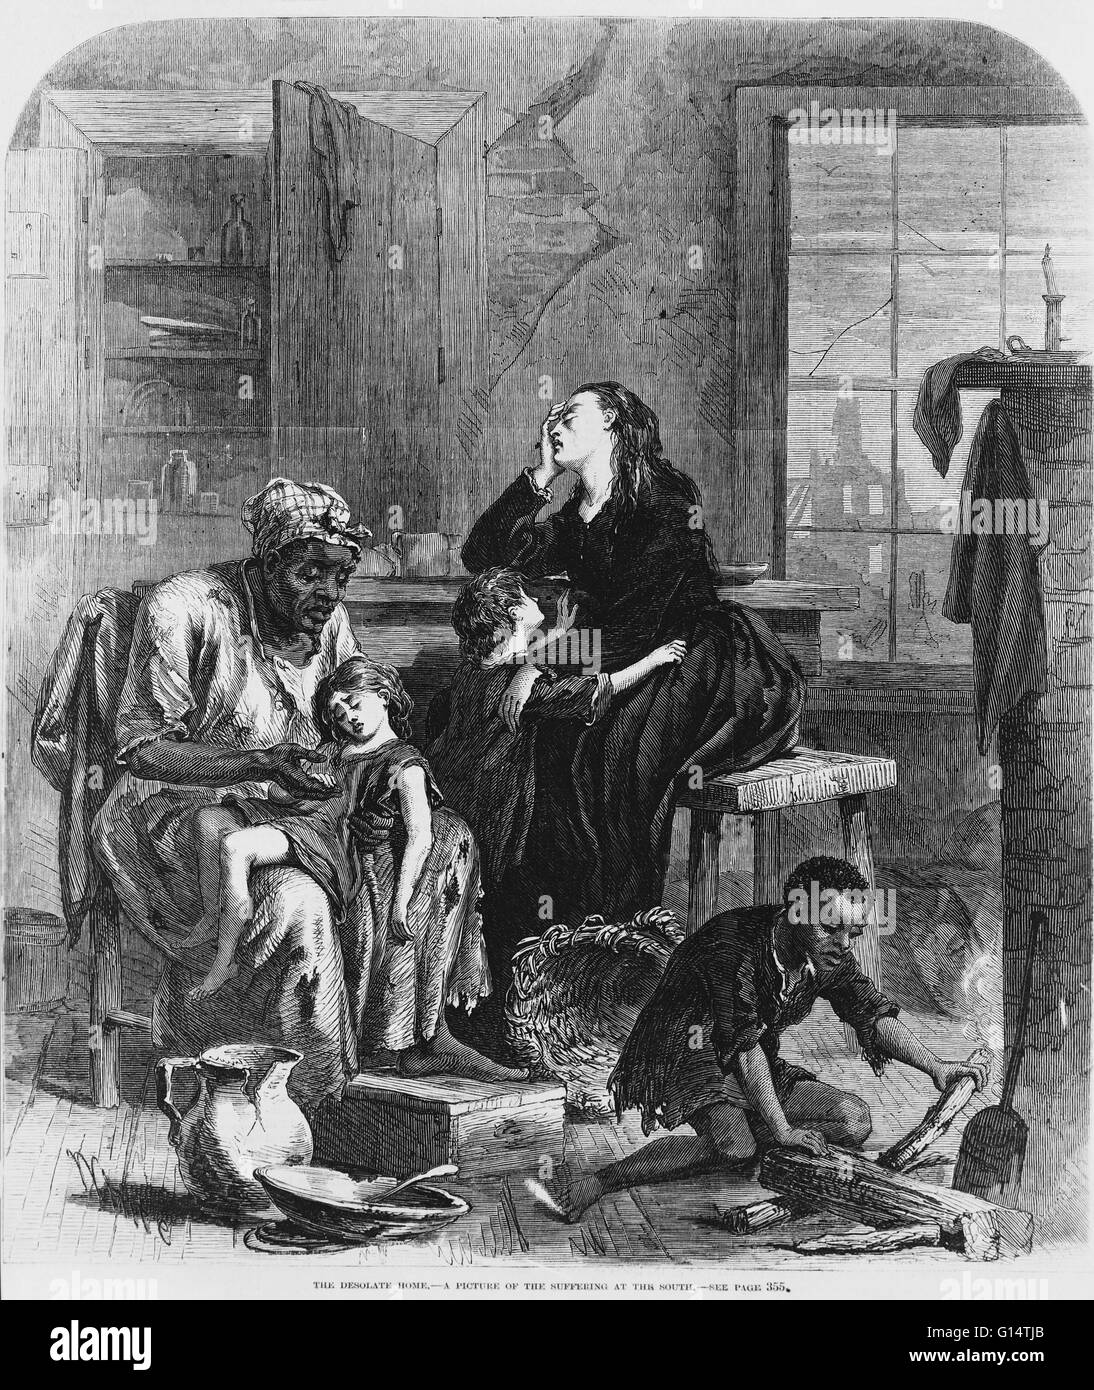 A wood engraving, 'The Desolate Home,' published in Frank Leslie's Illustrated Newspaper in 1867, showing suffering in the South during Reconstruction after the American Civil War. Stock Photo